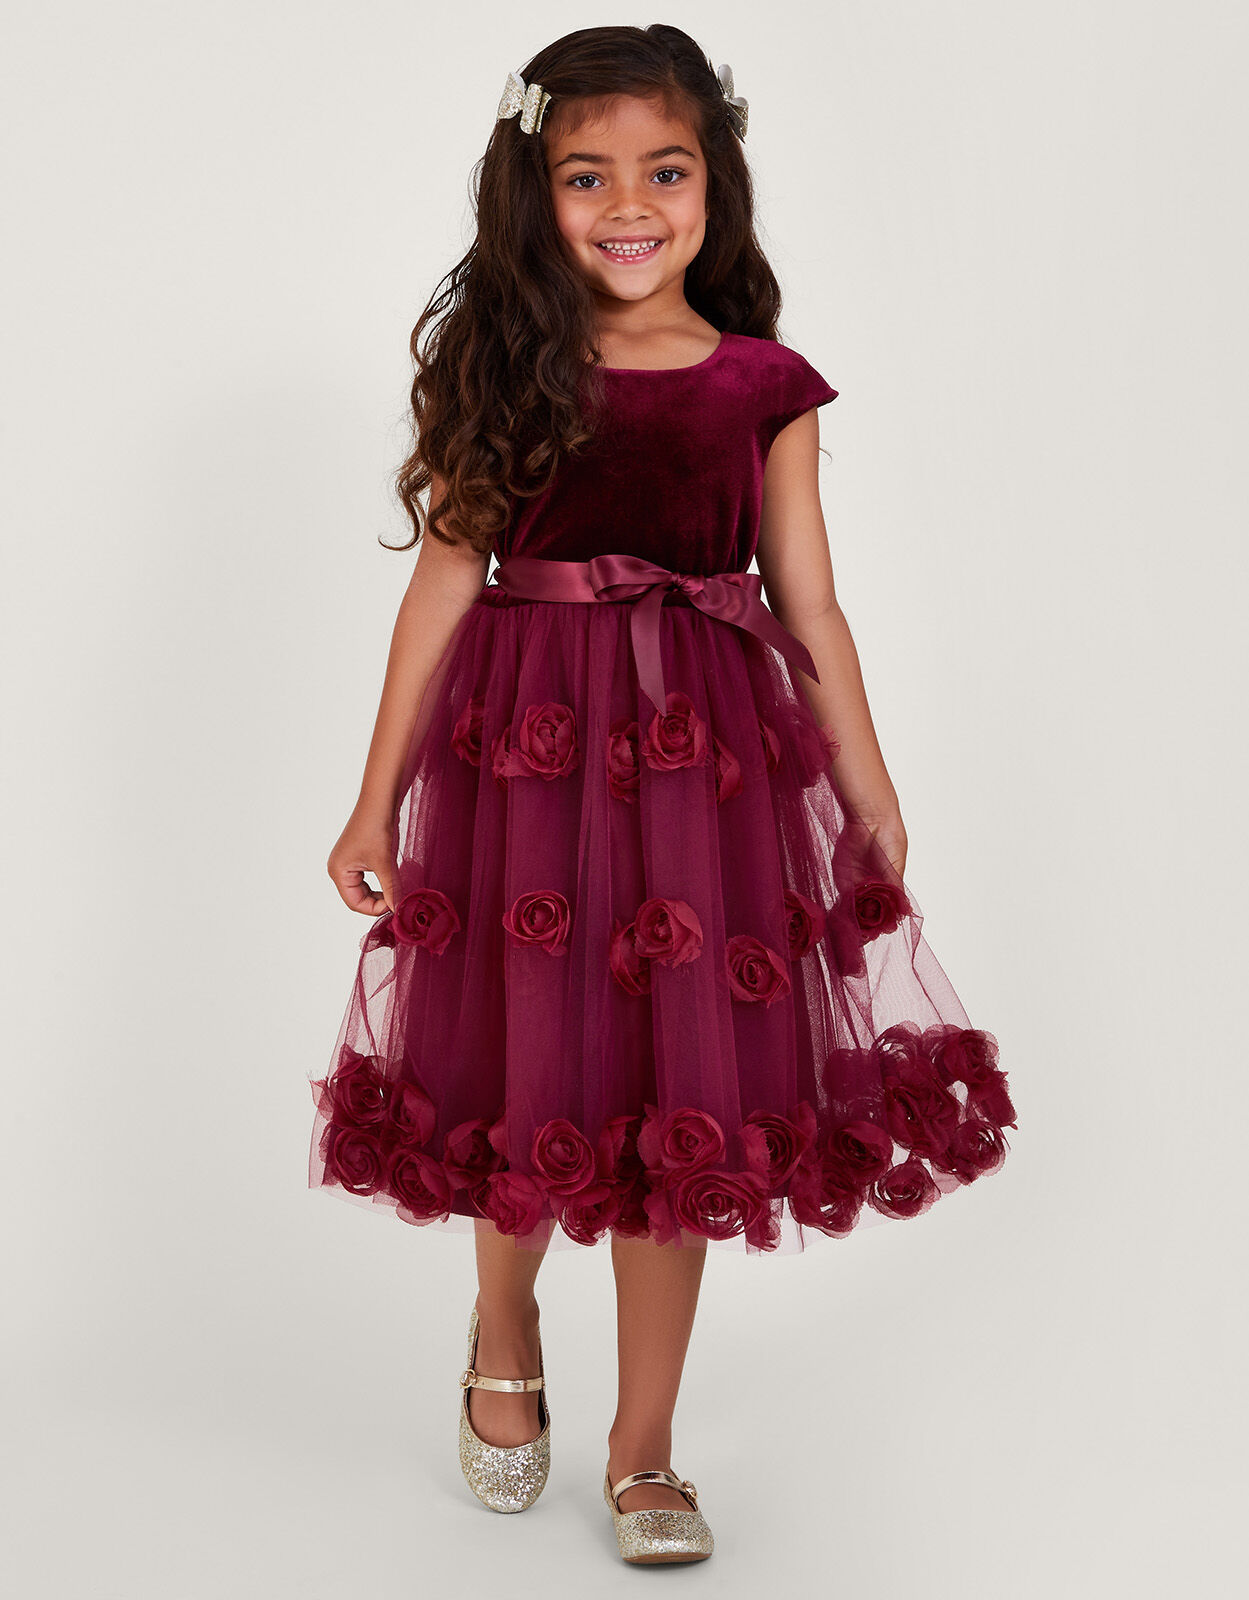 Girls Voilet Net Gown Dress Designer, Age Group: 1 to 10 Year